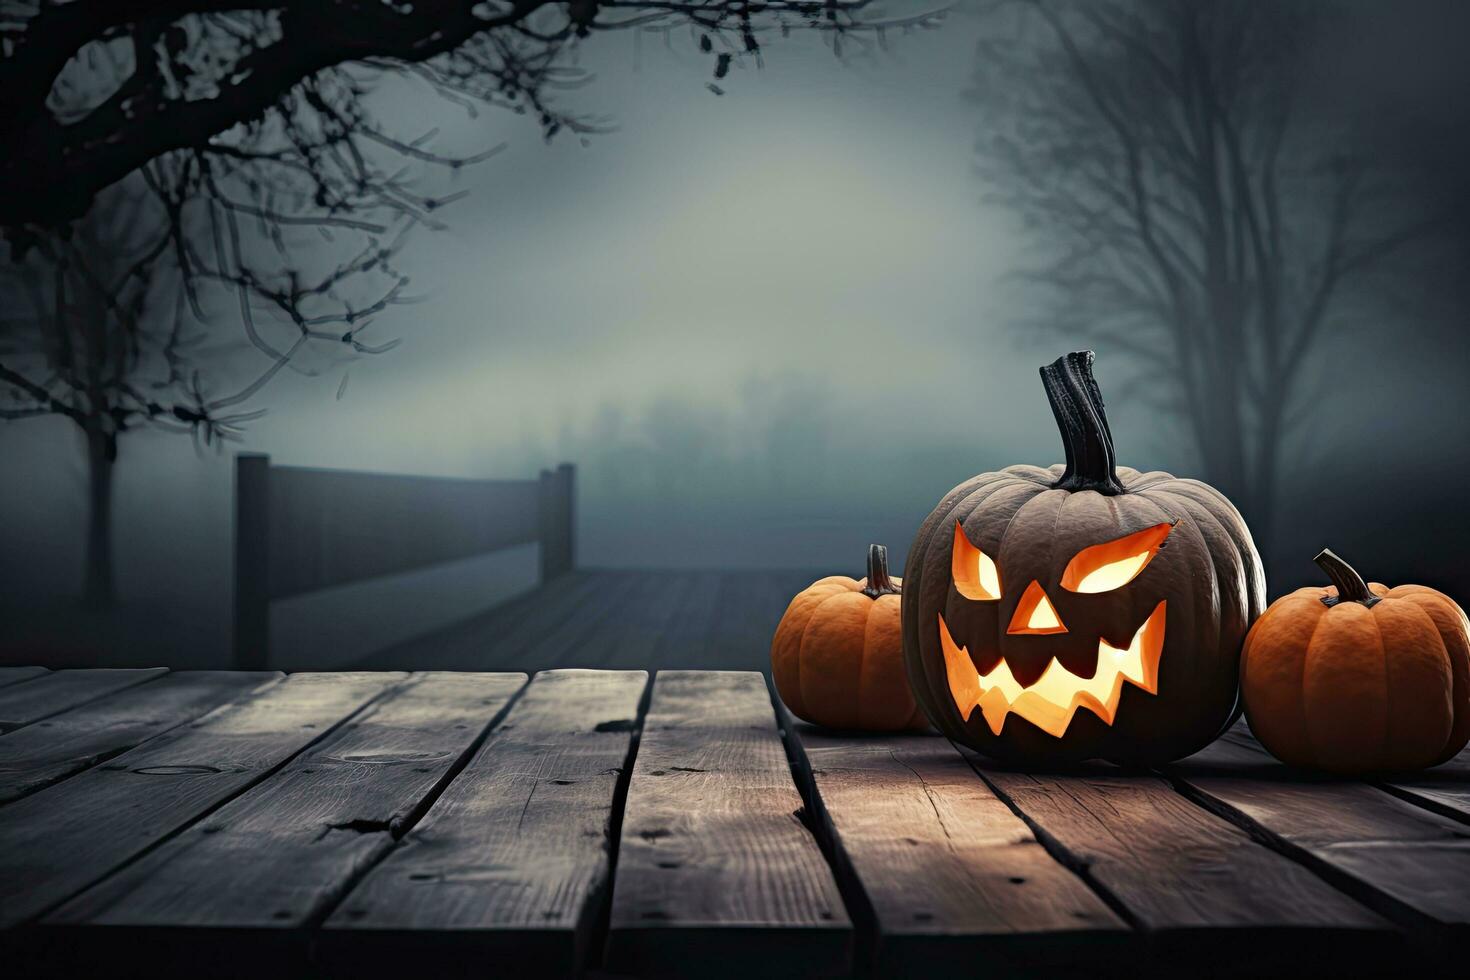 Halloween pumpkins on wooden planks with foggy background, One spooky halloween pumpkin, Jack O Lantern, with an evil face and eyes on a wooden bench, table with a misty gray, AI Generated photo